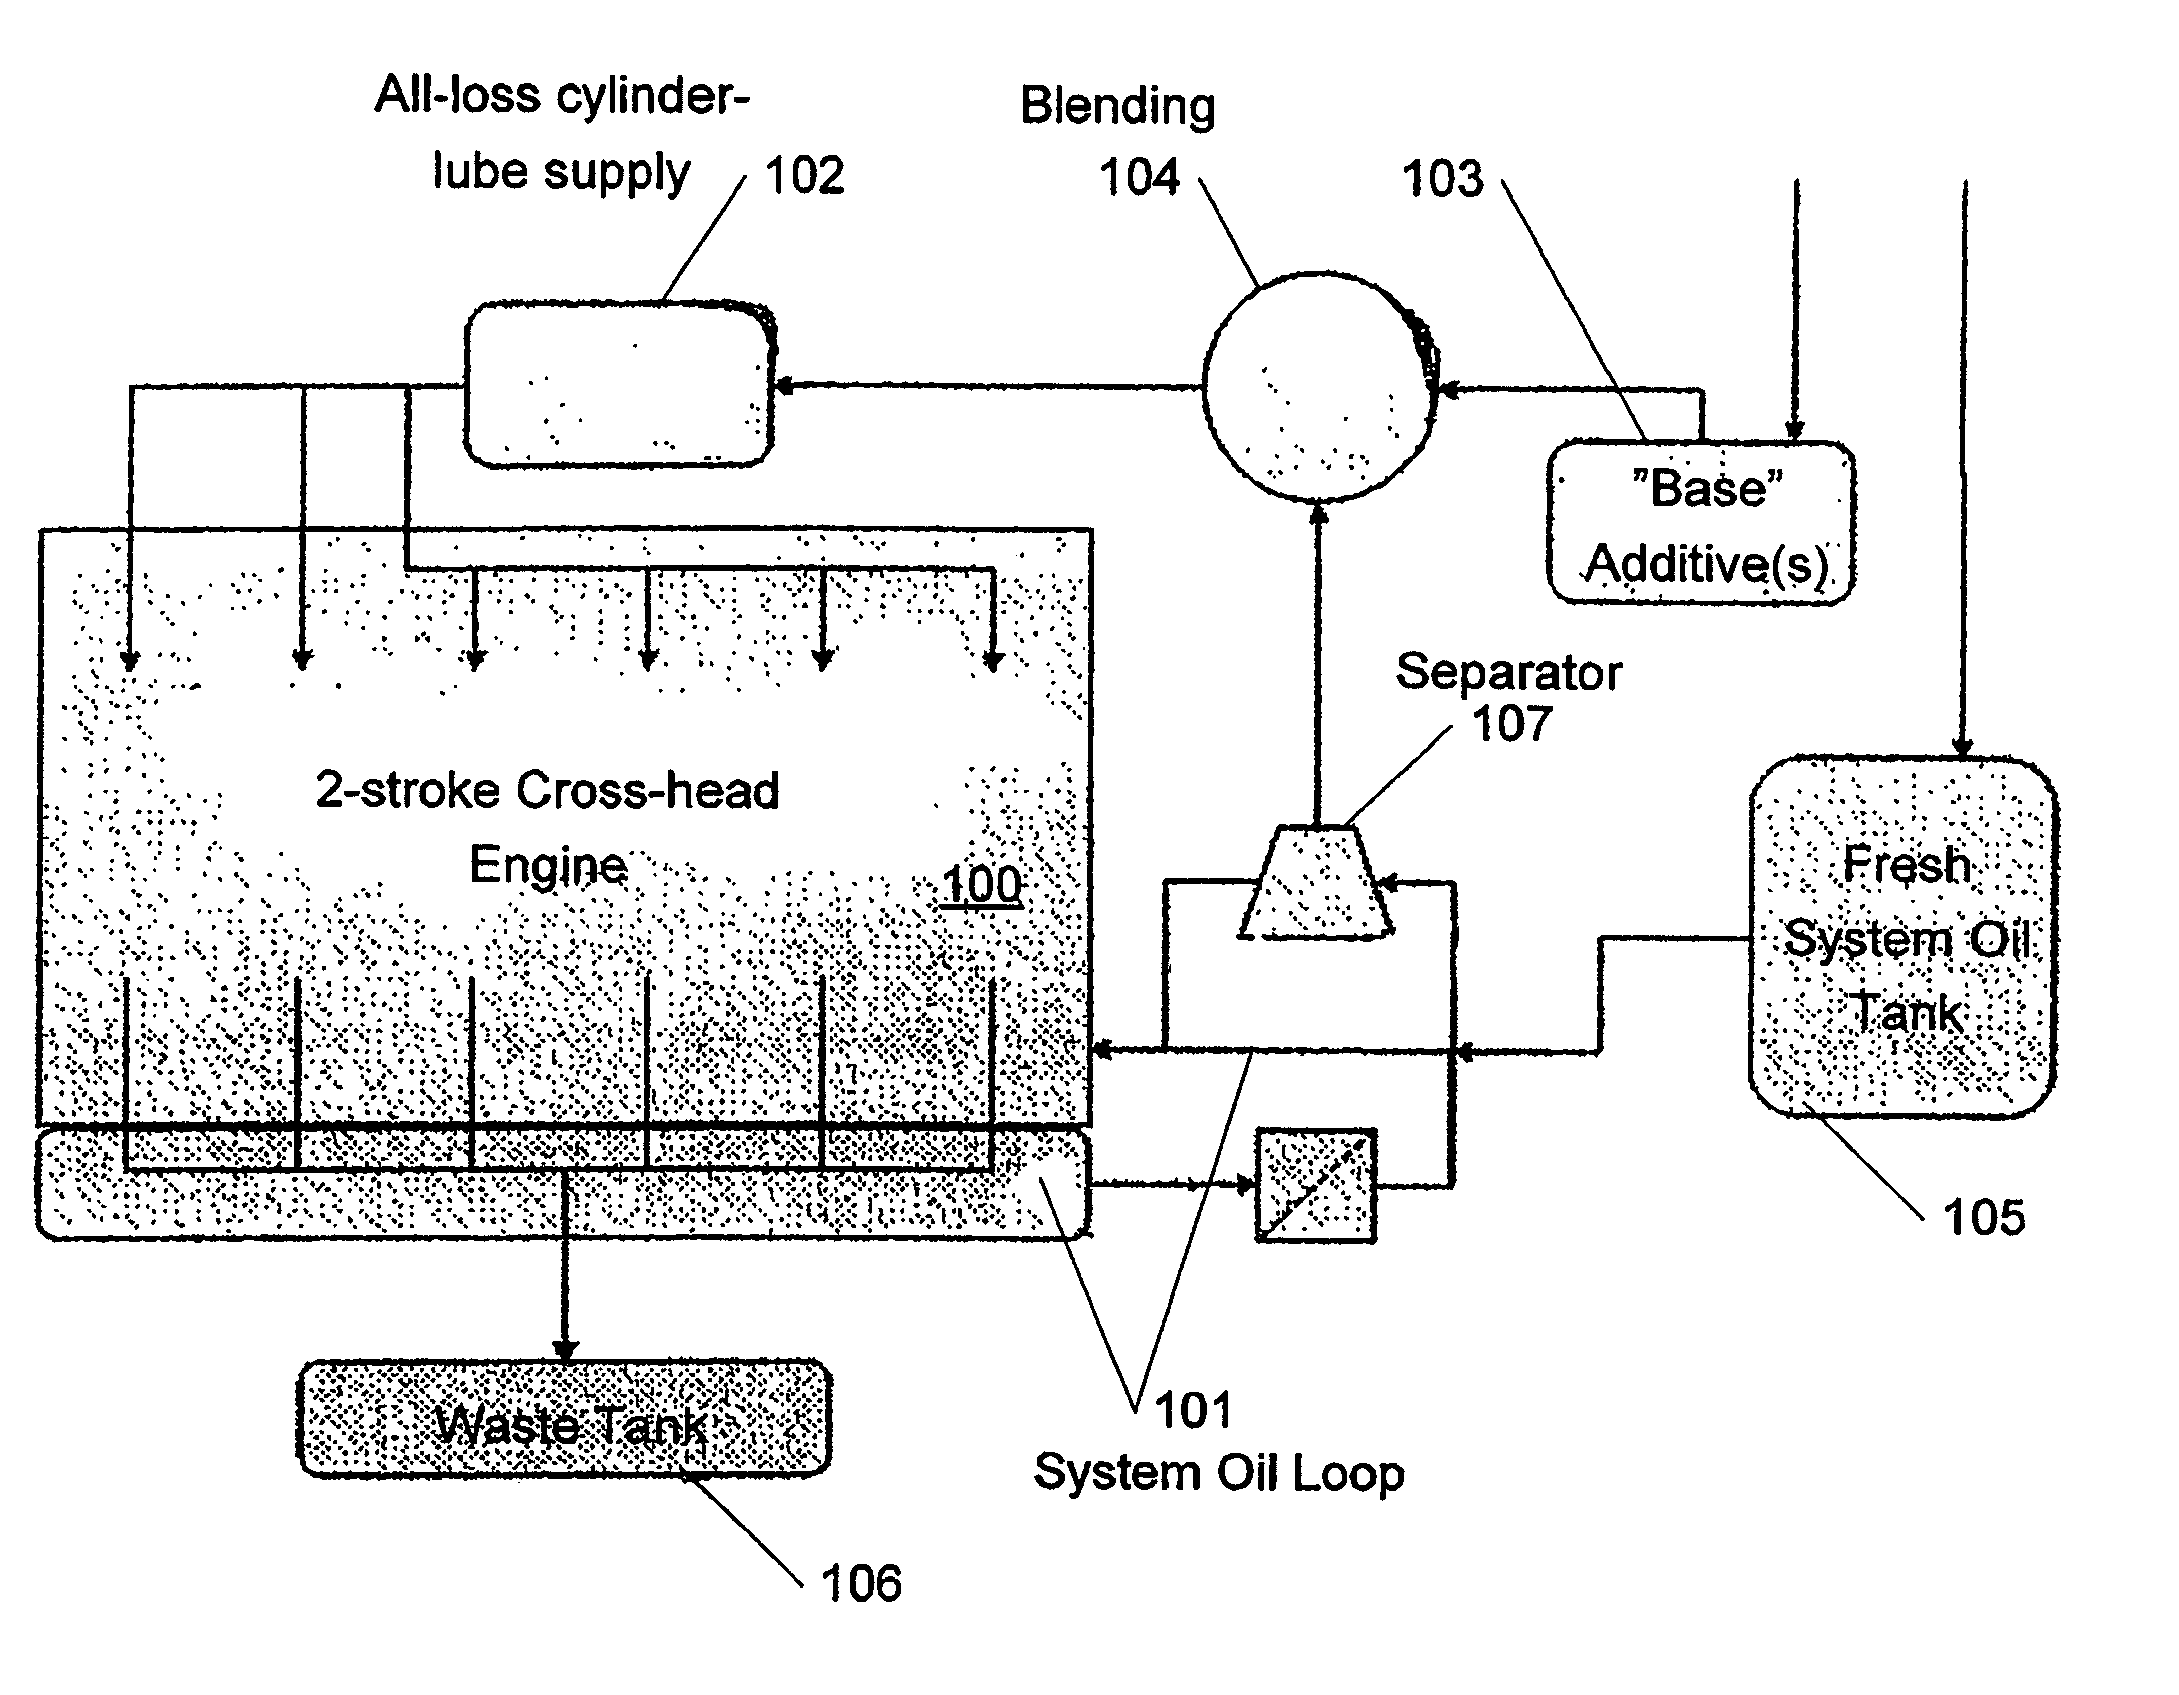 Method and system for modifying a used hydrocarbon fluid to create a cylinder oil